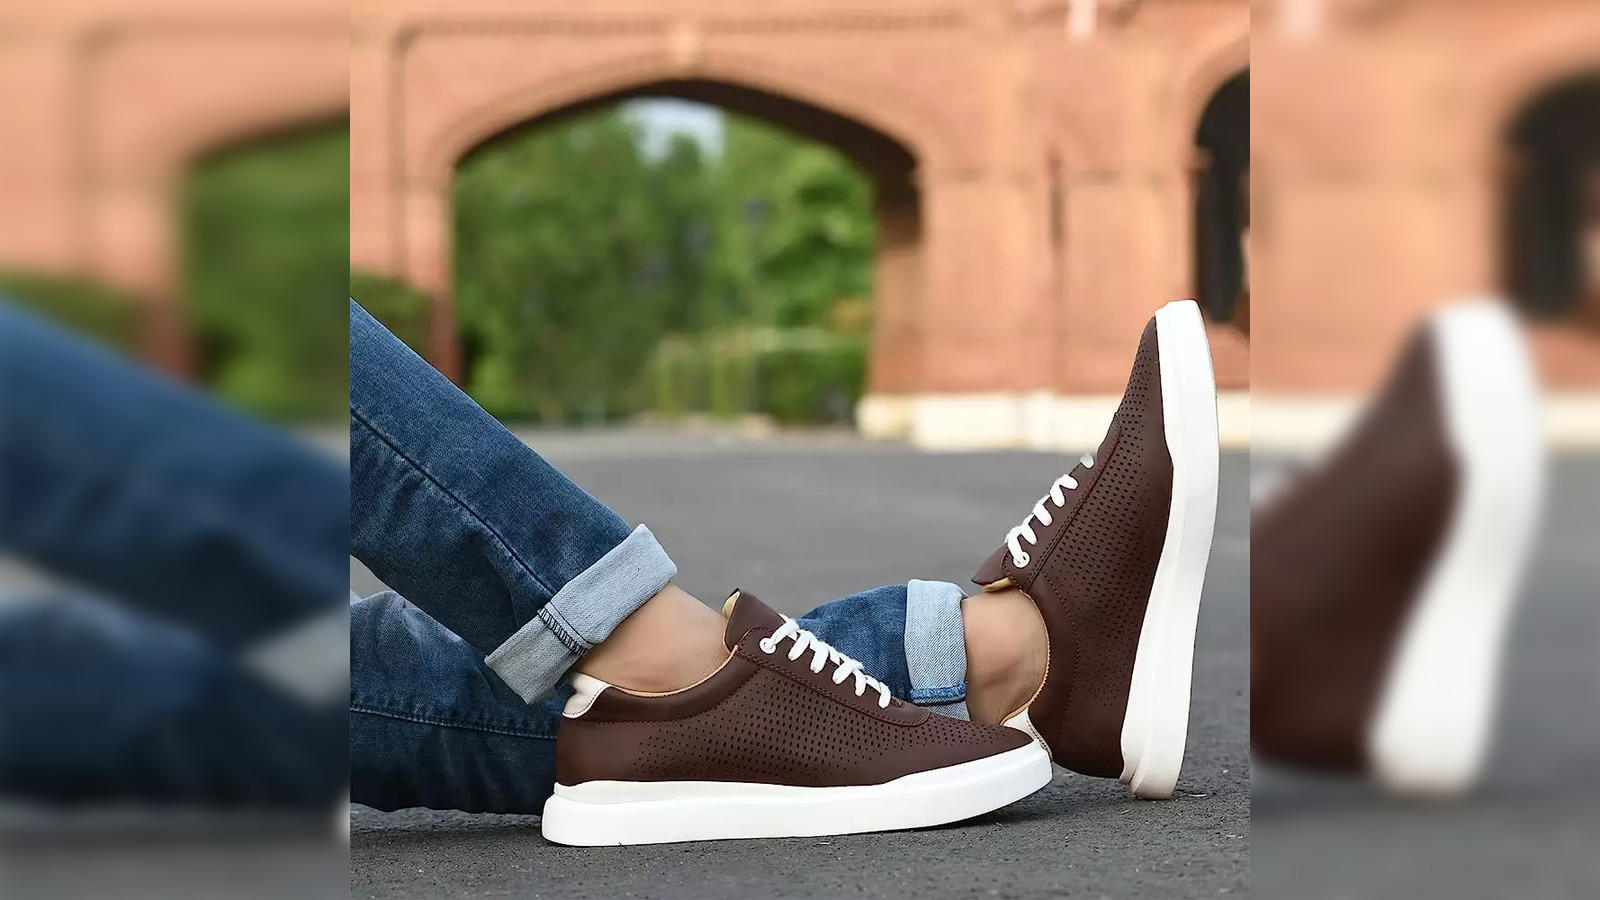 Buy Woodland Mens Leather Casual Shoes Camel Colour Size: 40 EURO at  Amazon.in